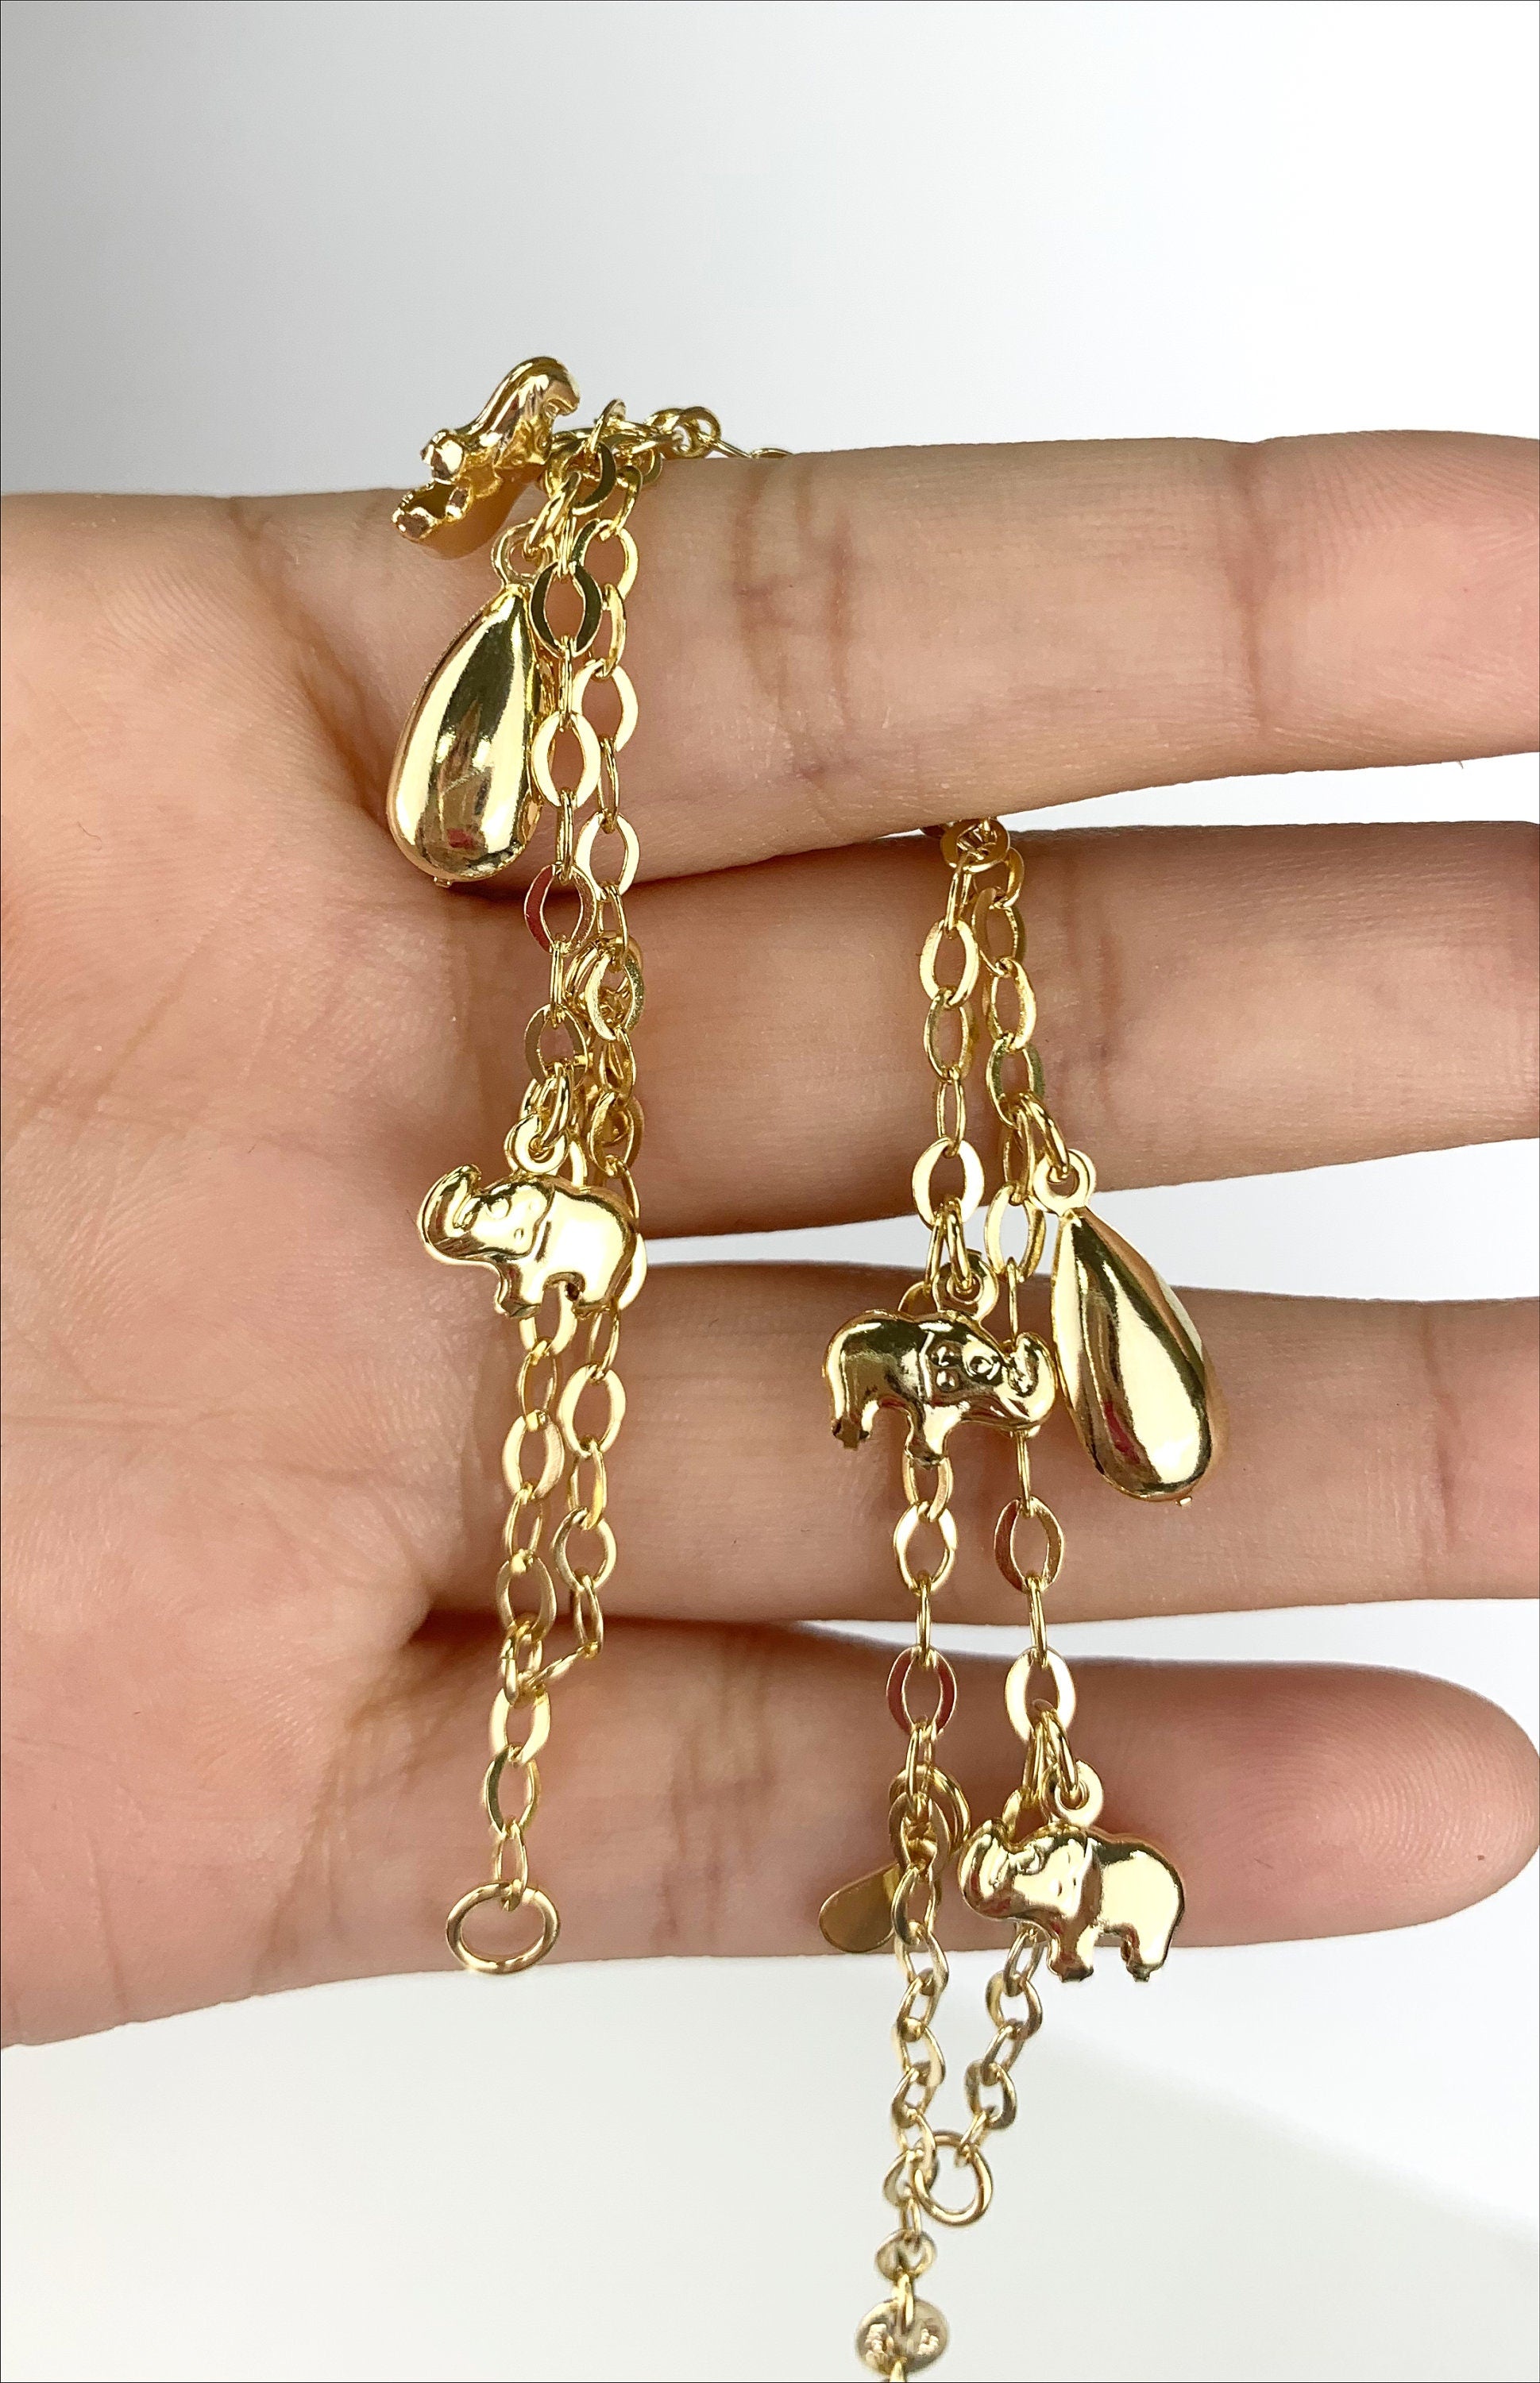 18k Gold Filled Double Chains, Elephants and Teardrops Charms Double Bracelet Wholesale  Jewelry Supplies